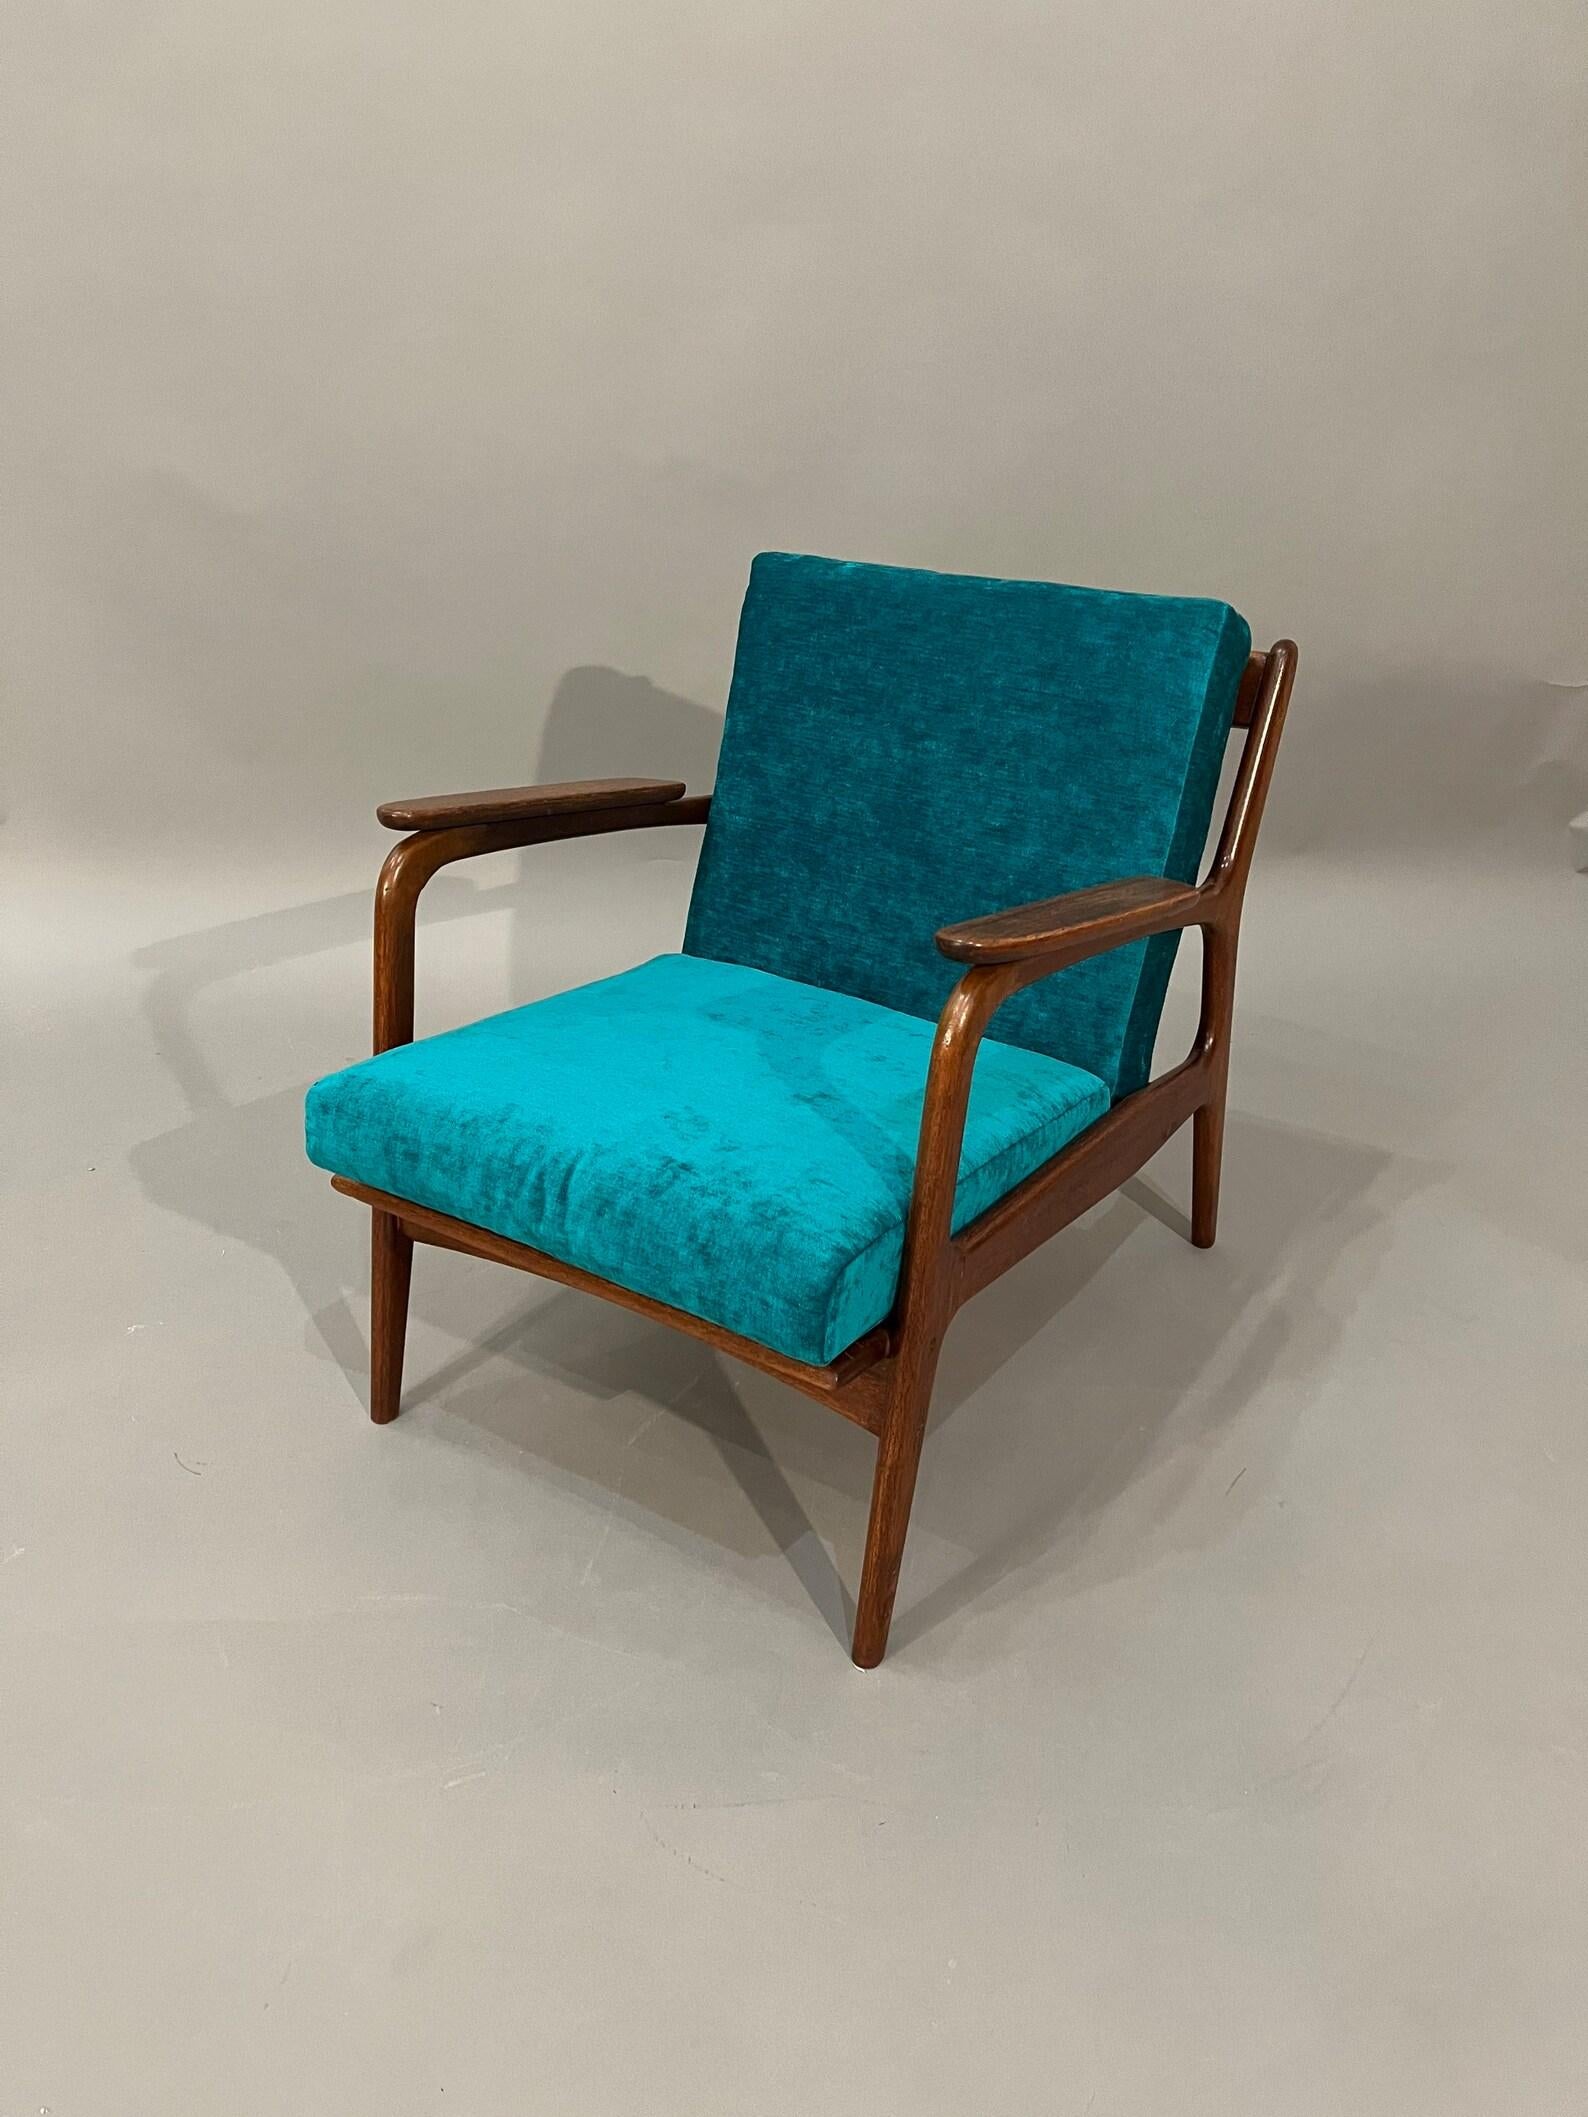 Mid-Century, Curated, Walnut arm lounge chair 1960s Circa completely restored with new cushions with thick blue velvet fabric.

Arm to Arm: 25” inches 
Interior depth: 20” inches 
Cushions thickness: 3.5” inches 
Seat hight: 16” inches  
Arms